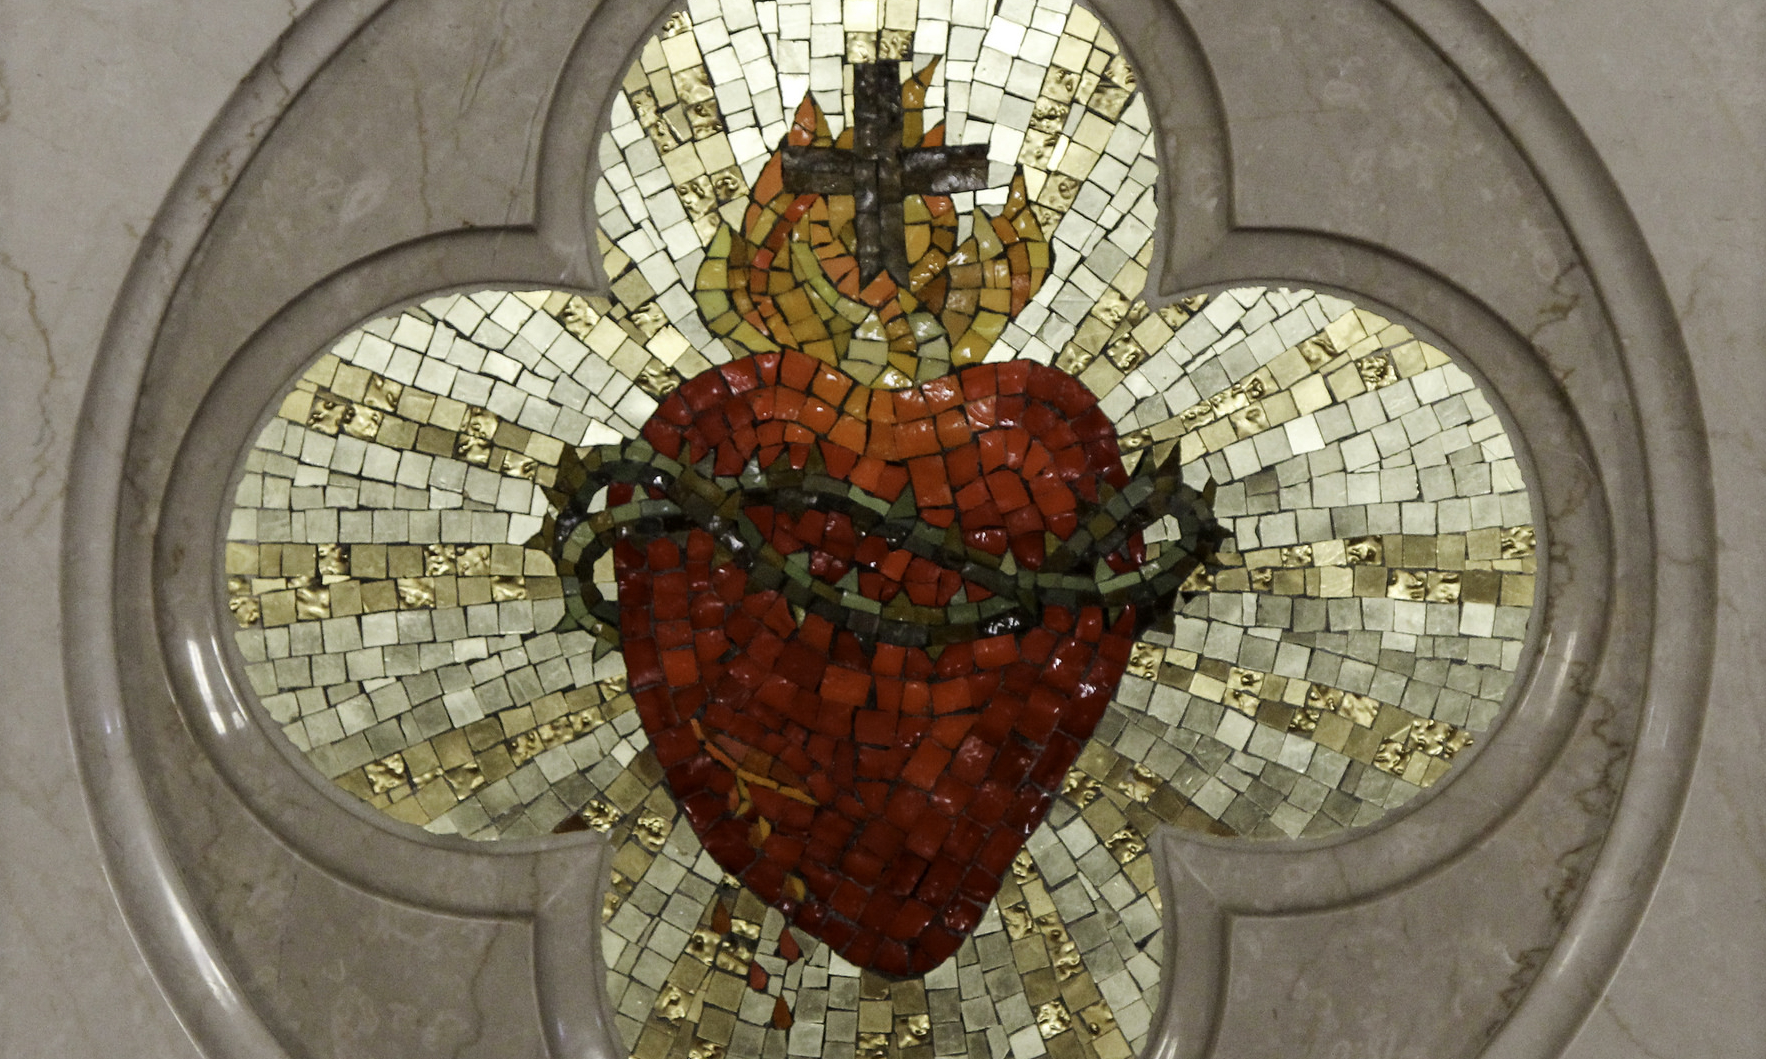 Photo by Lawrence Lew, Mosaic of the Sacred Heart (used with permission).